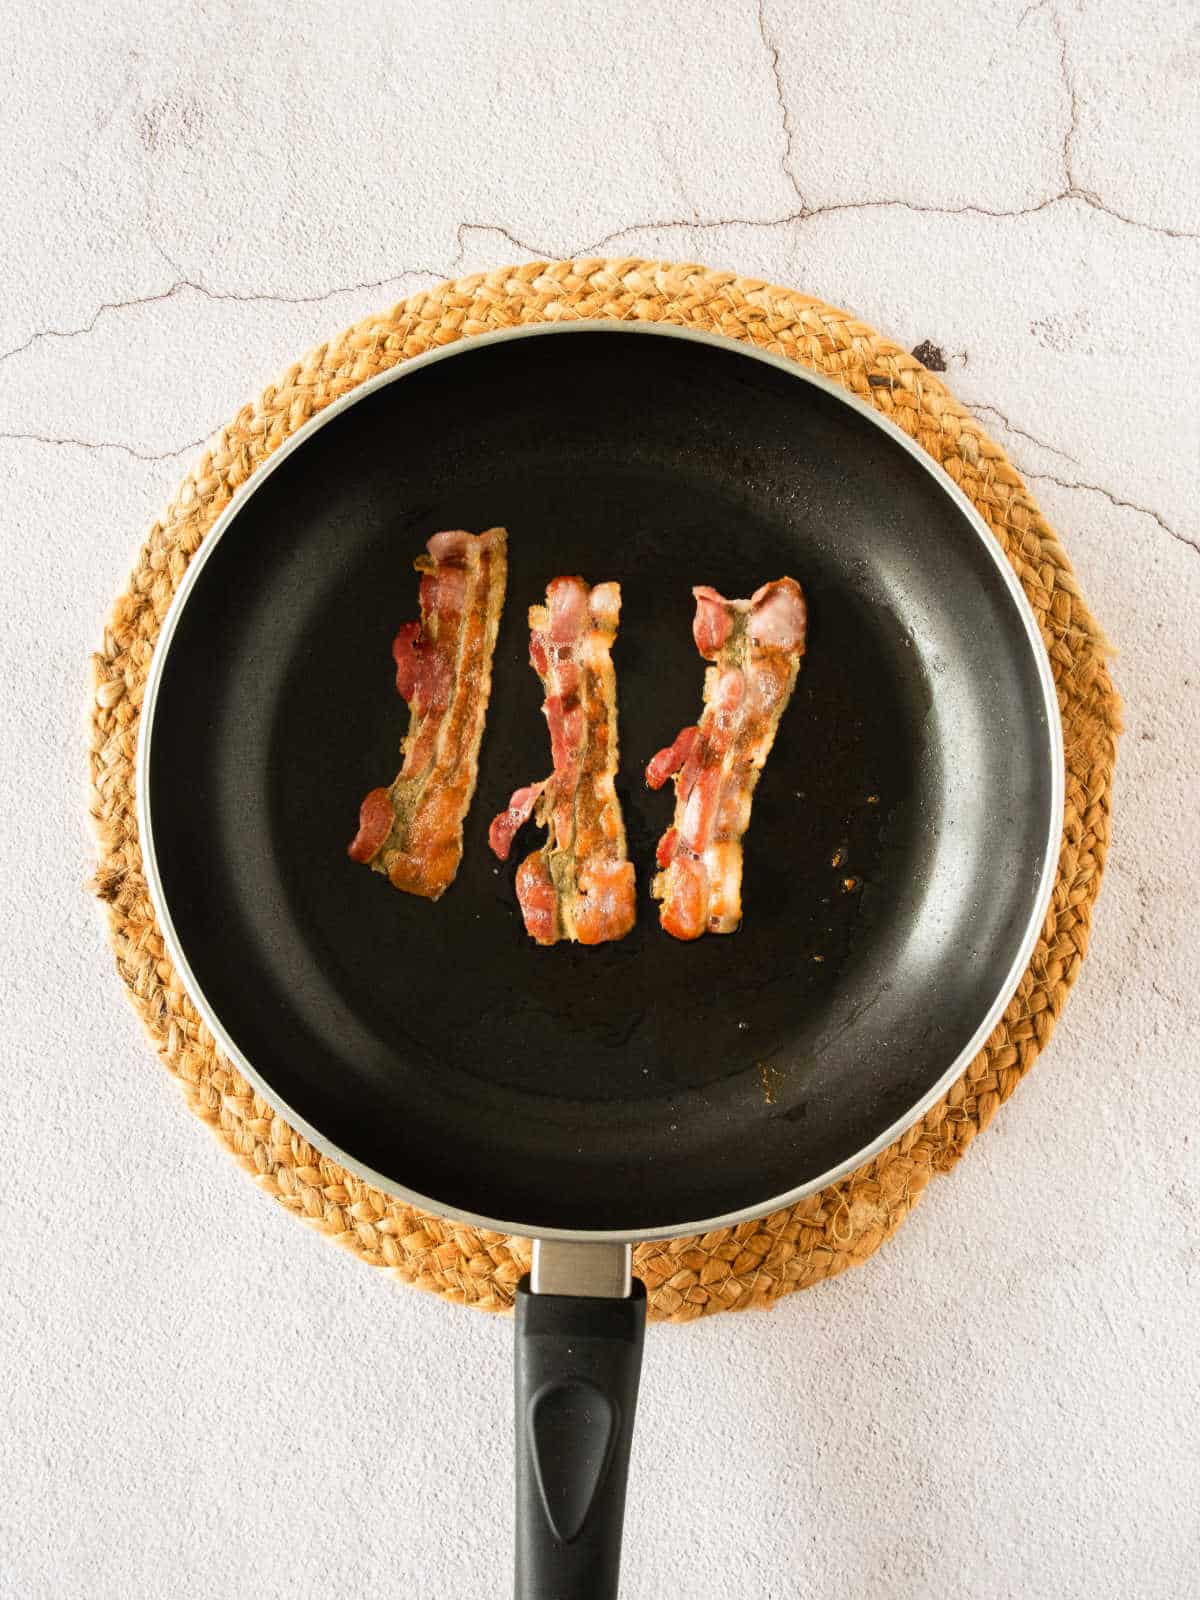 Crispy bacon slices in a black skillet on a beige placemat. Light gray surface.